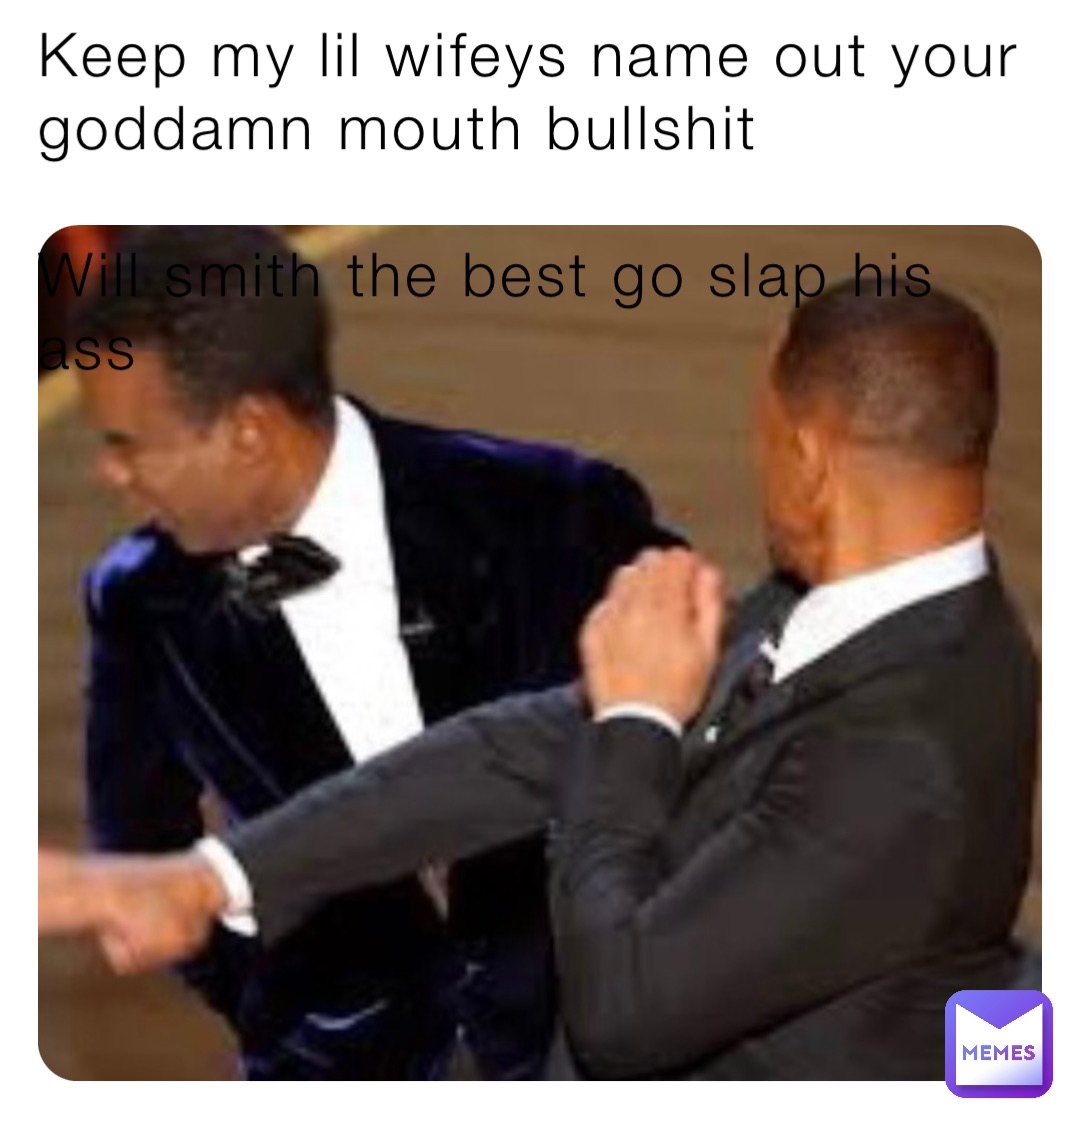 Keep my lil wifeys name out your goddamn mouth bullshit

Will smith the best go slap his ass